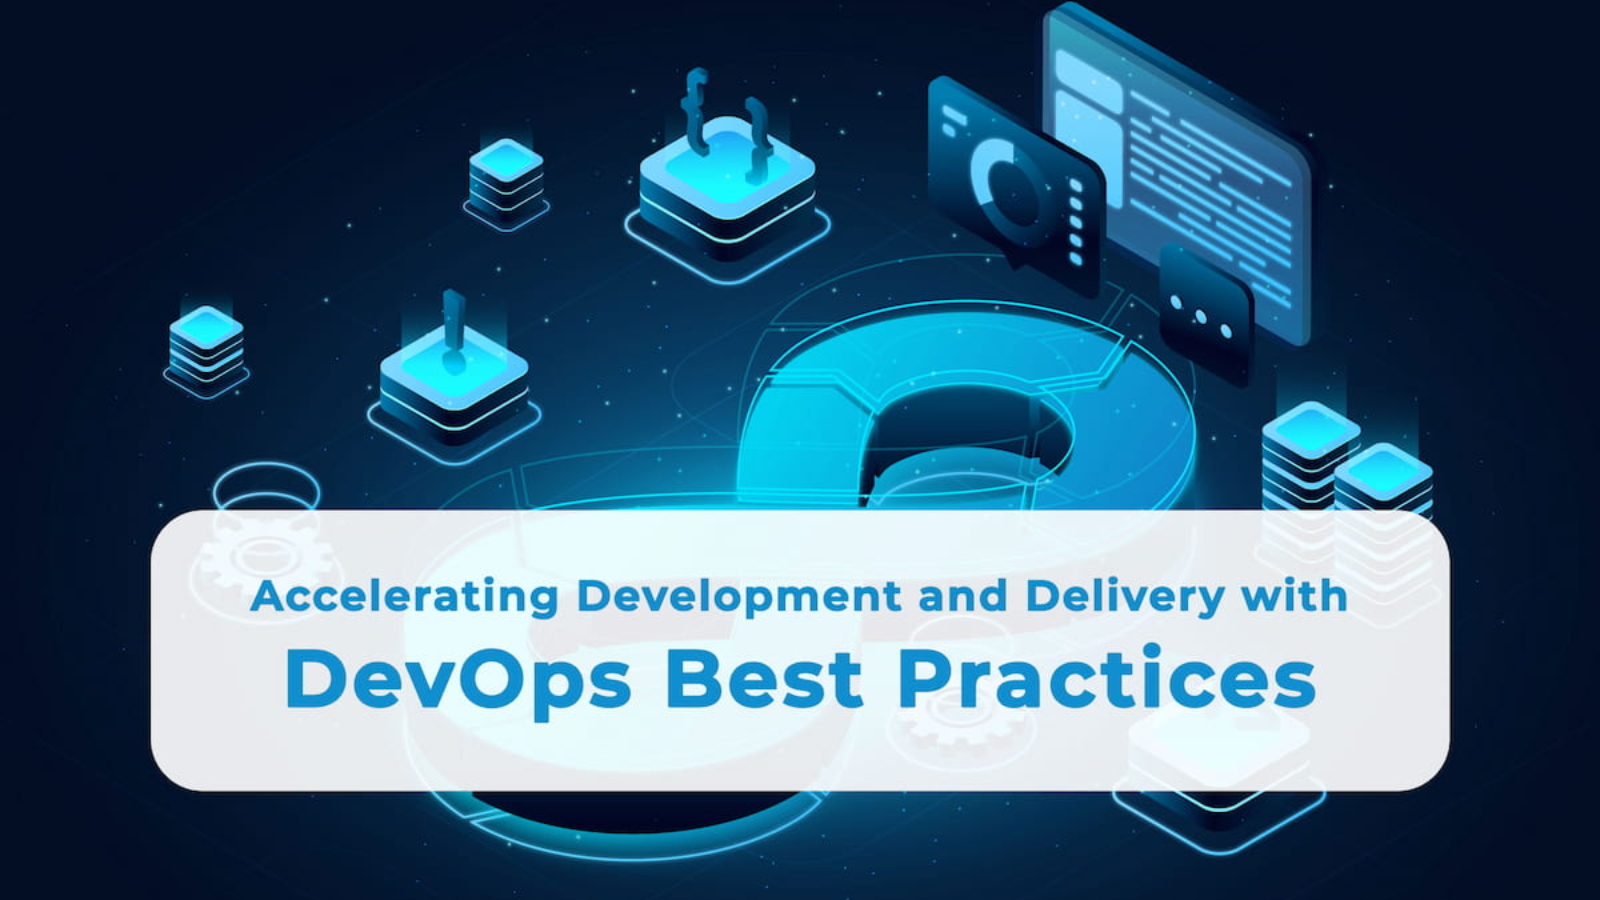 Accelerating Development and Delivery with DevOps Best Practices